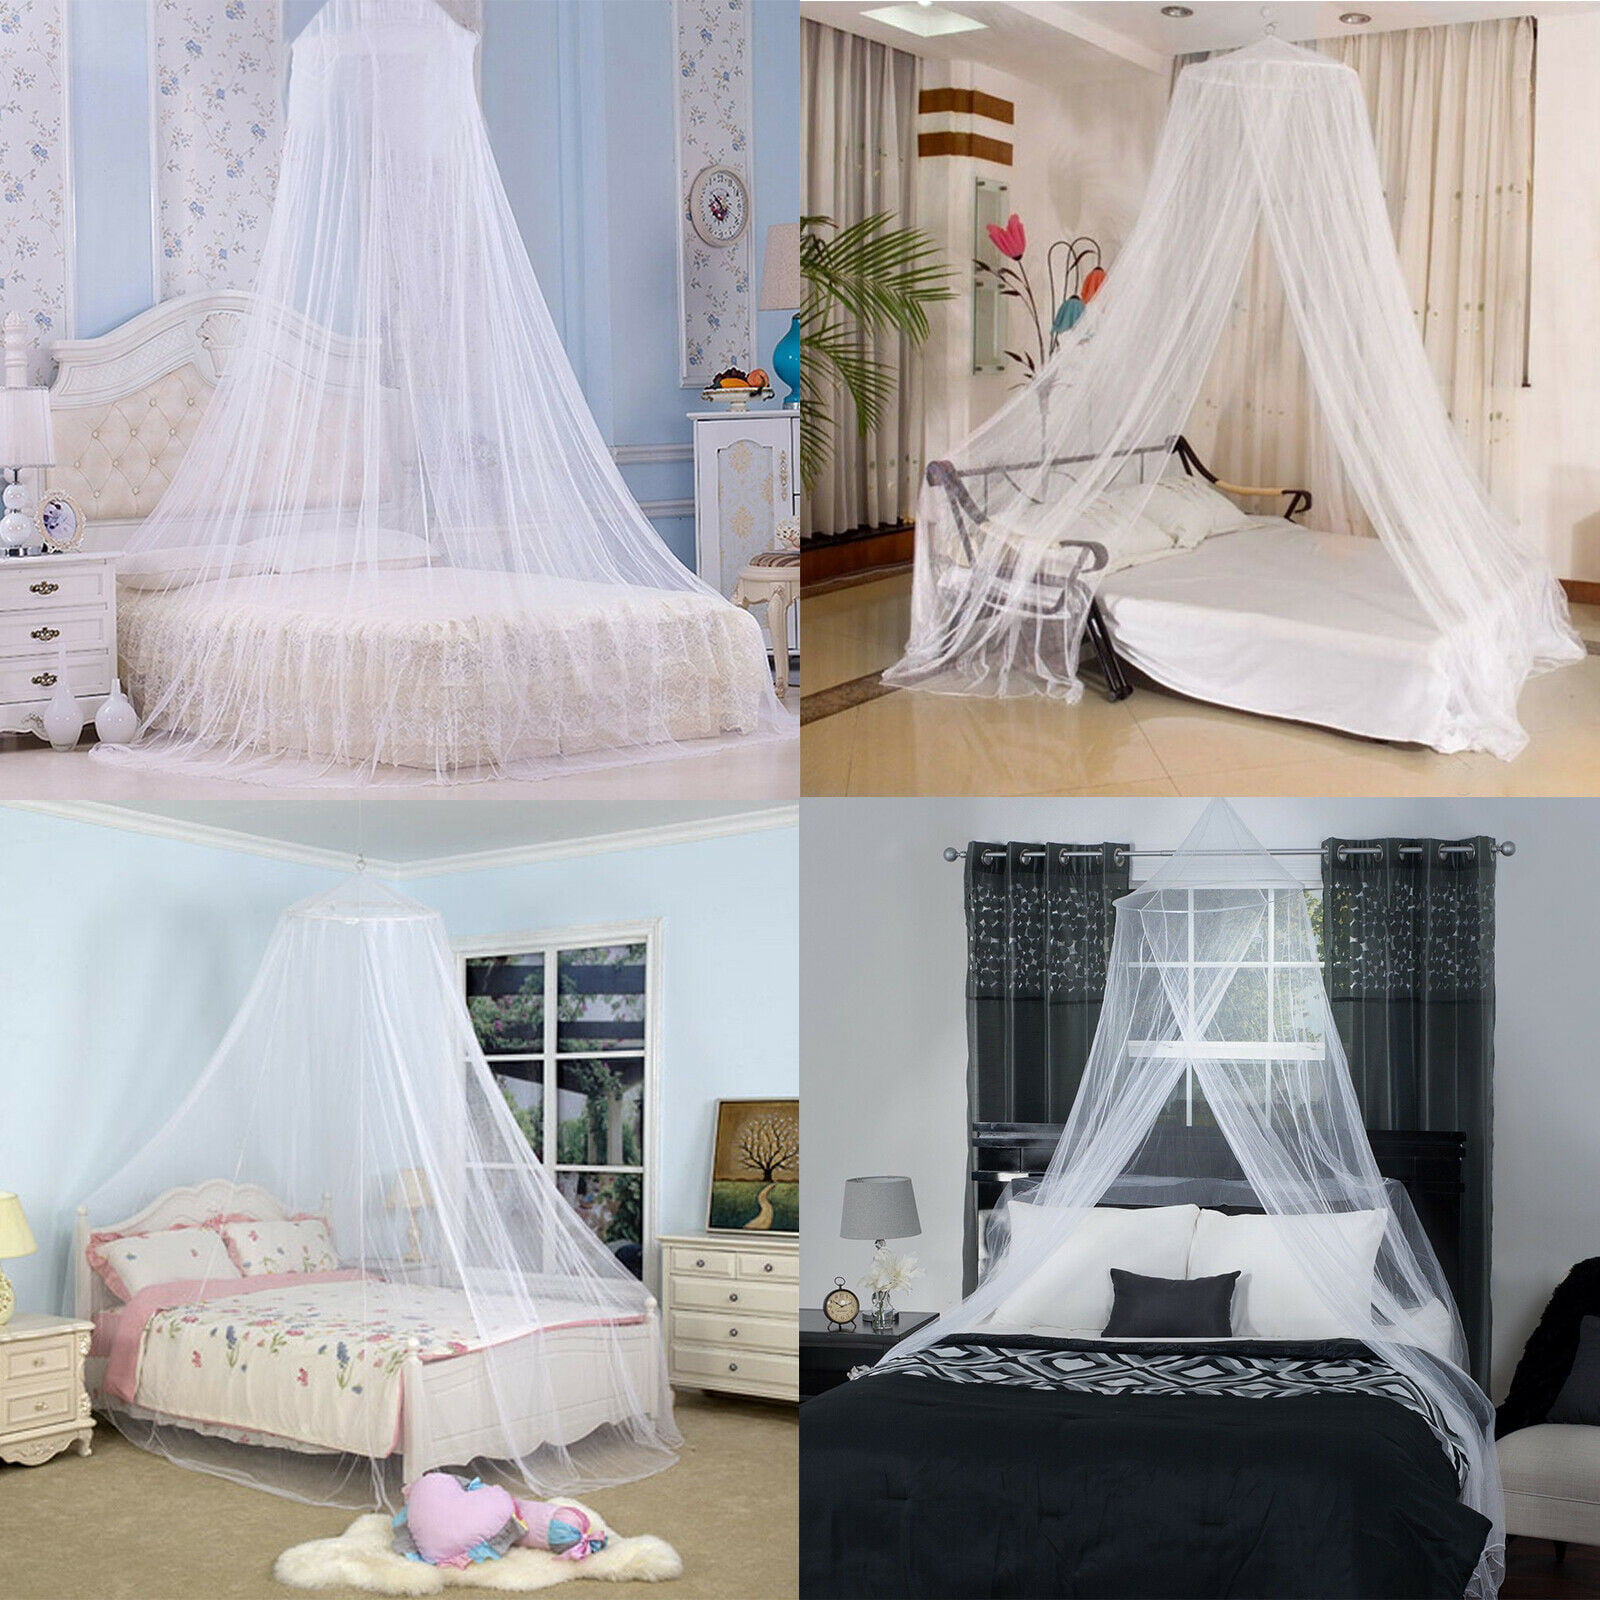 Mosquito Nets Bed Home Bedding Mesh Tent Lace Canopy Elegant Netting Queen Size 